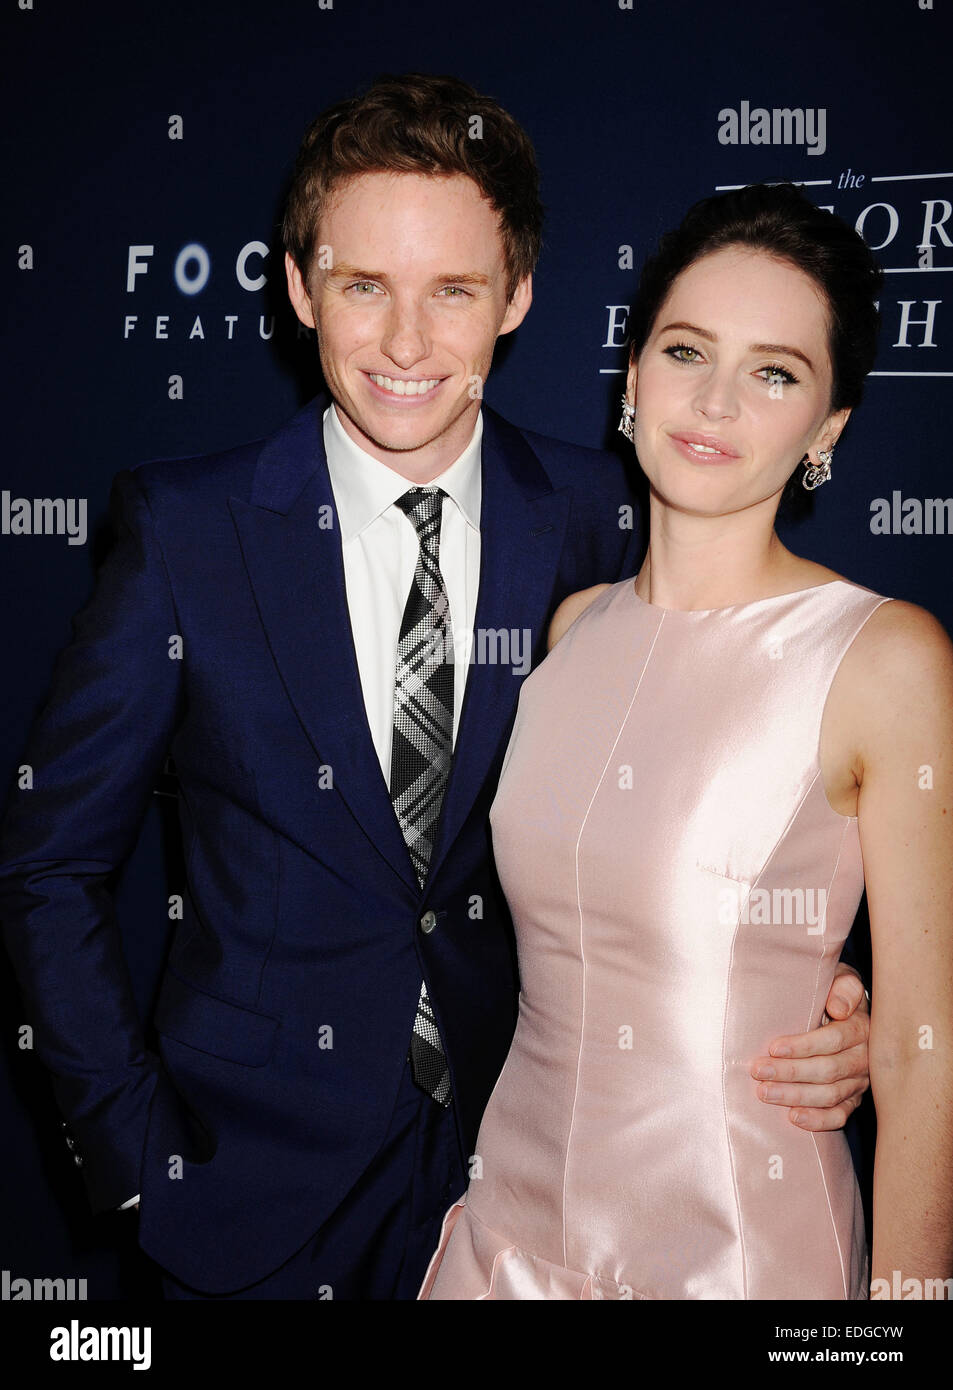 FELICITY JONES and EDDIE REDMAYNE  at the Los Angeles premiere of 'The Theory Of Everything' at the AMPAS Samuel Goldwyn Theater, Beverley Hills, California, 28 October 2014 Stock Photo